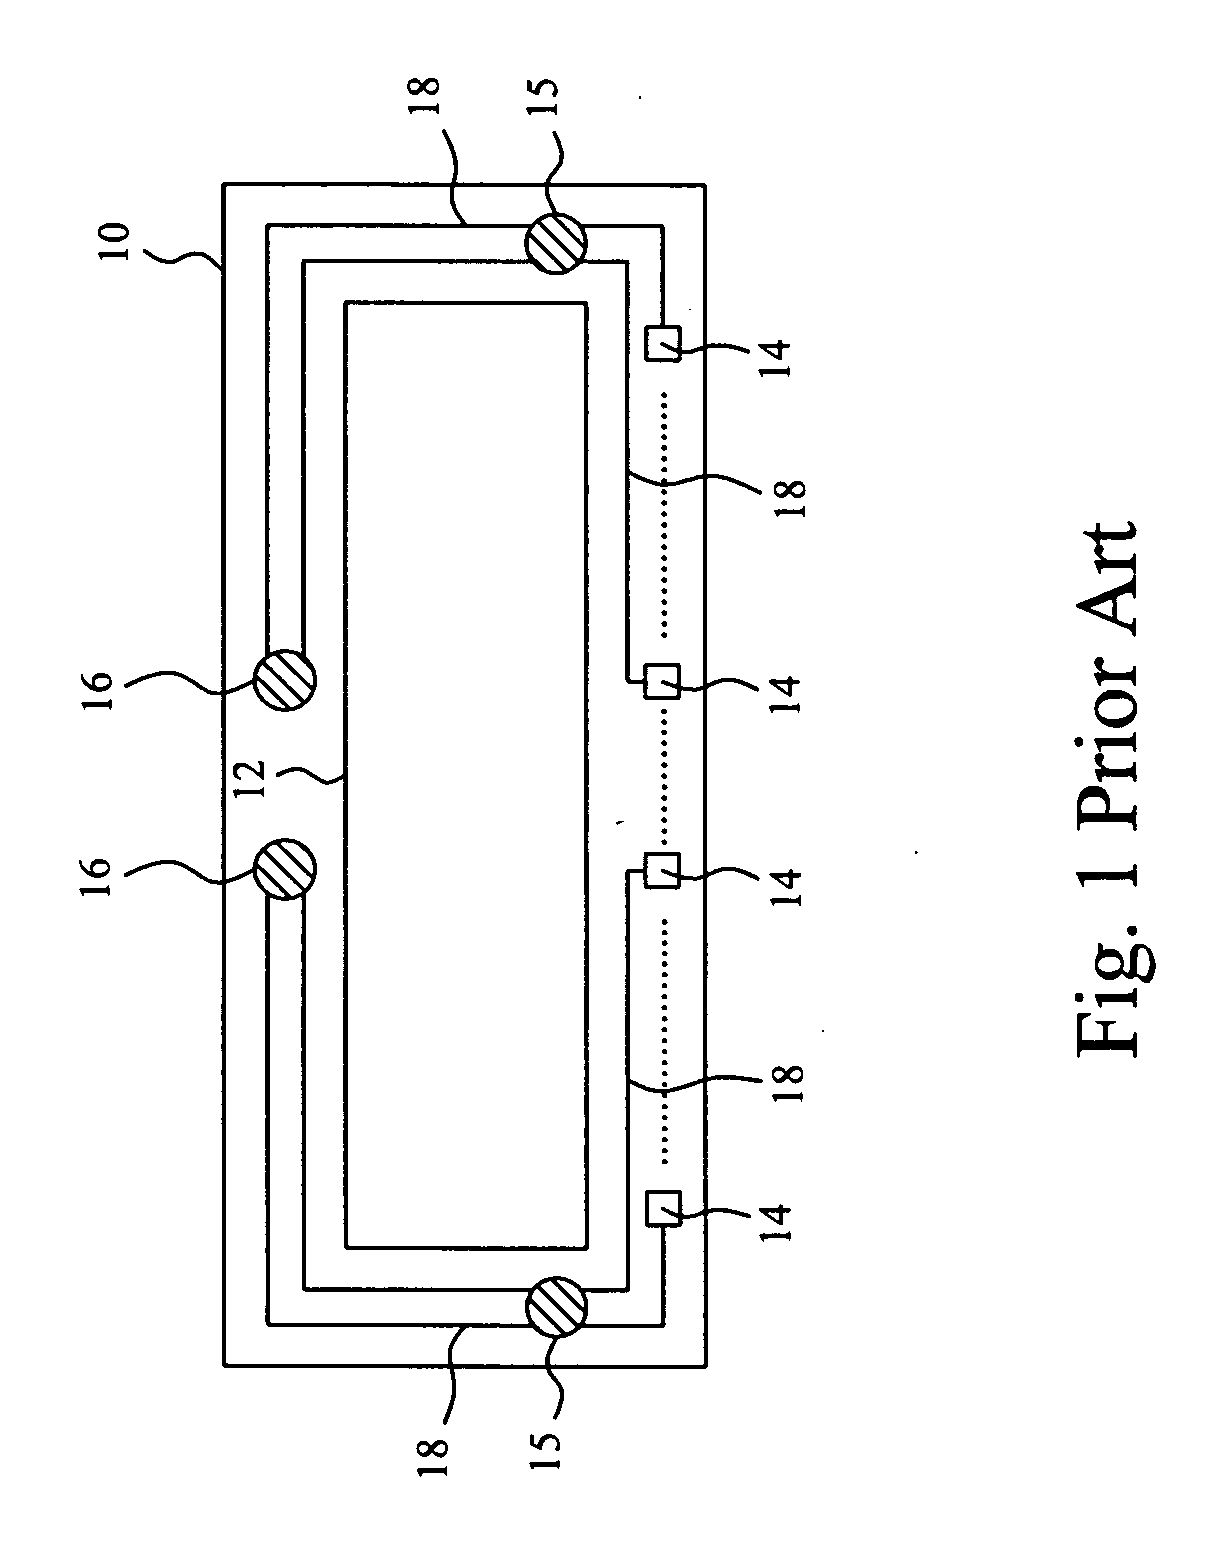 LCD source driver for improving electrostatic discharge